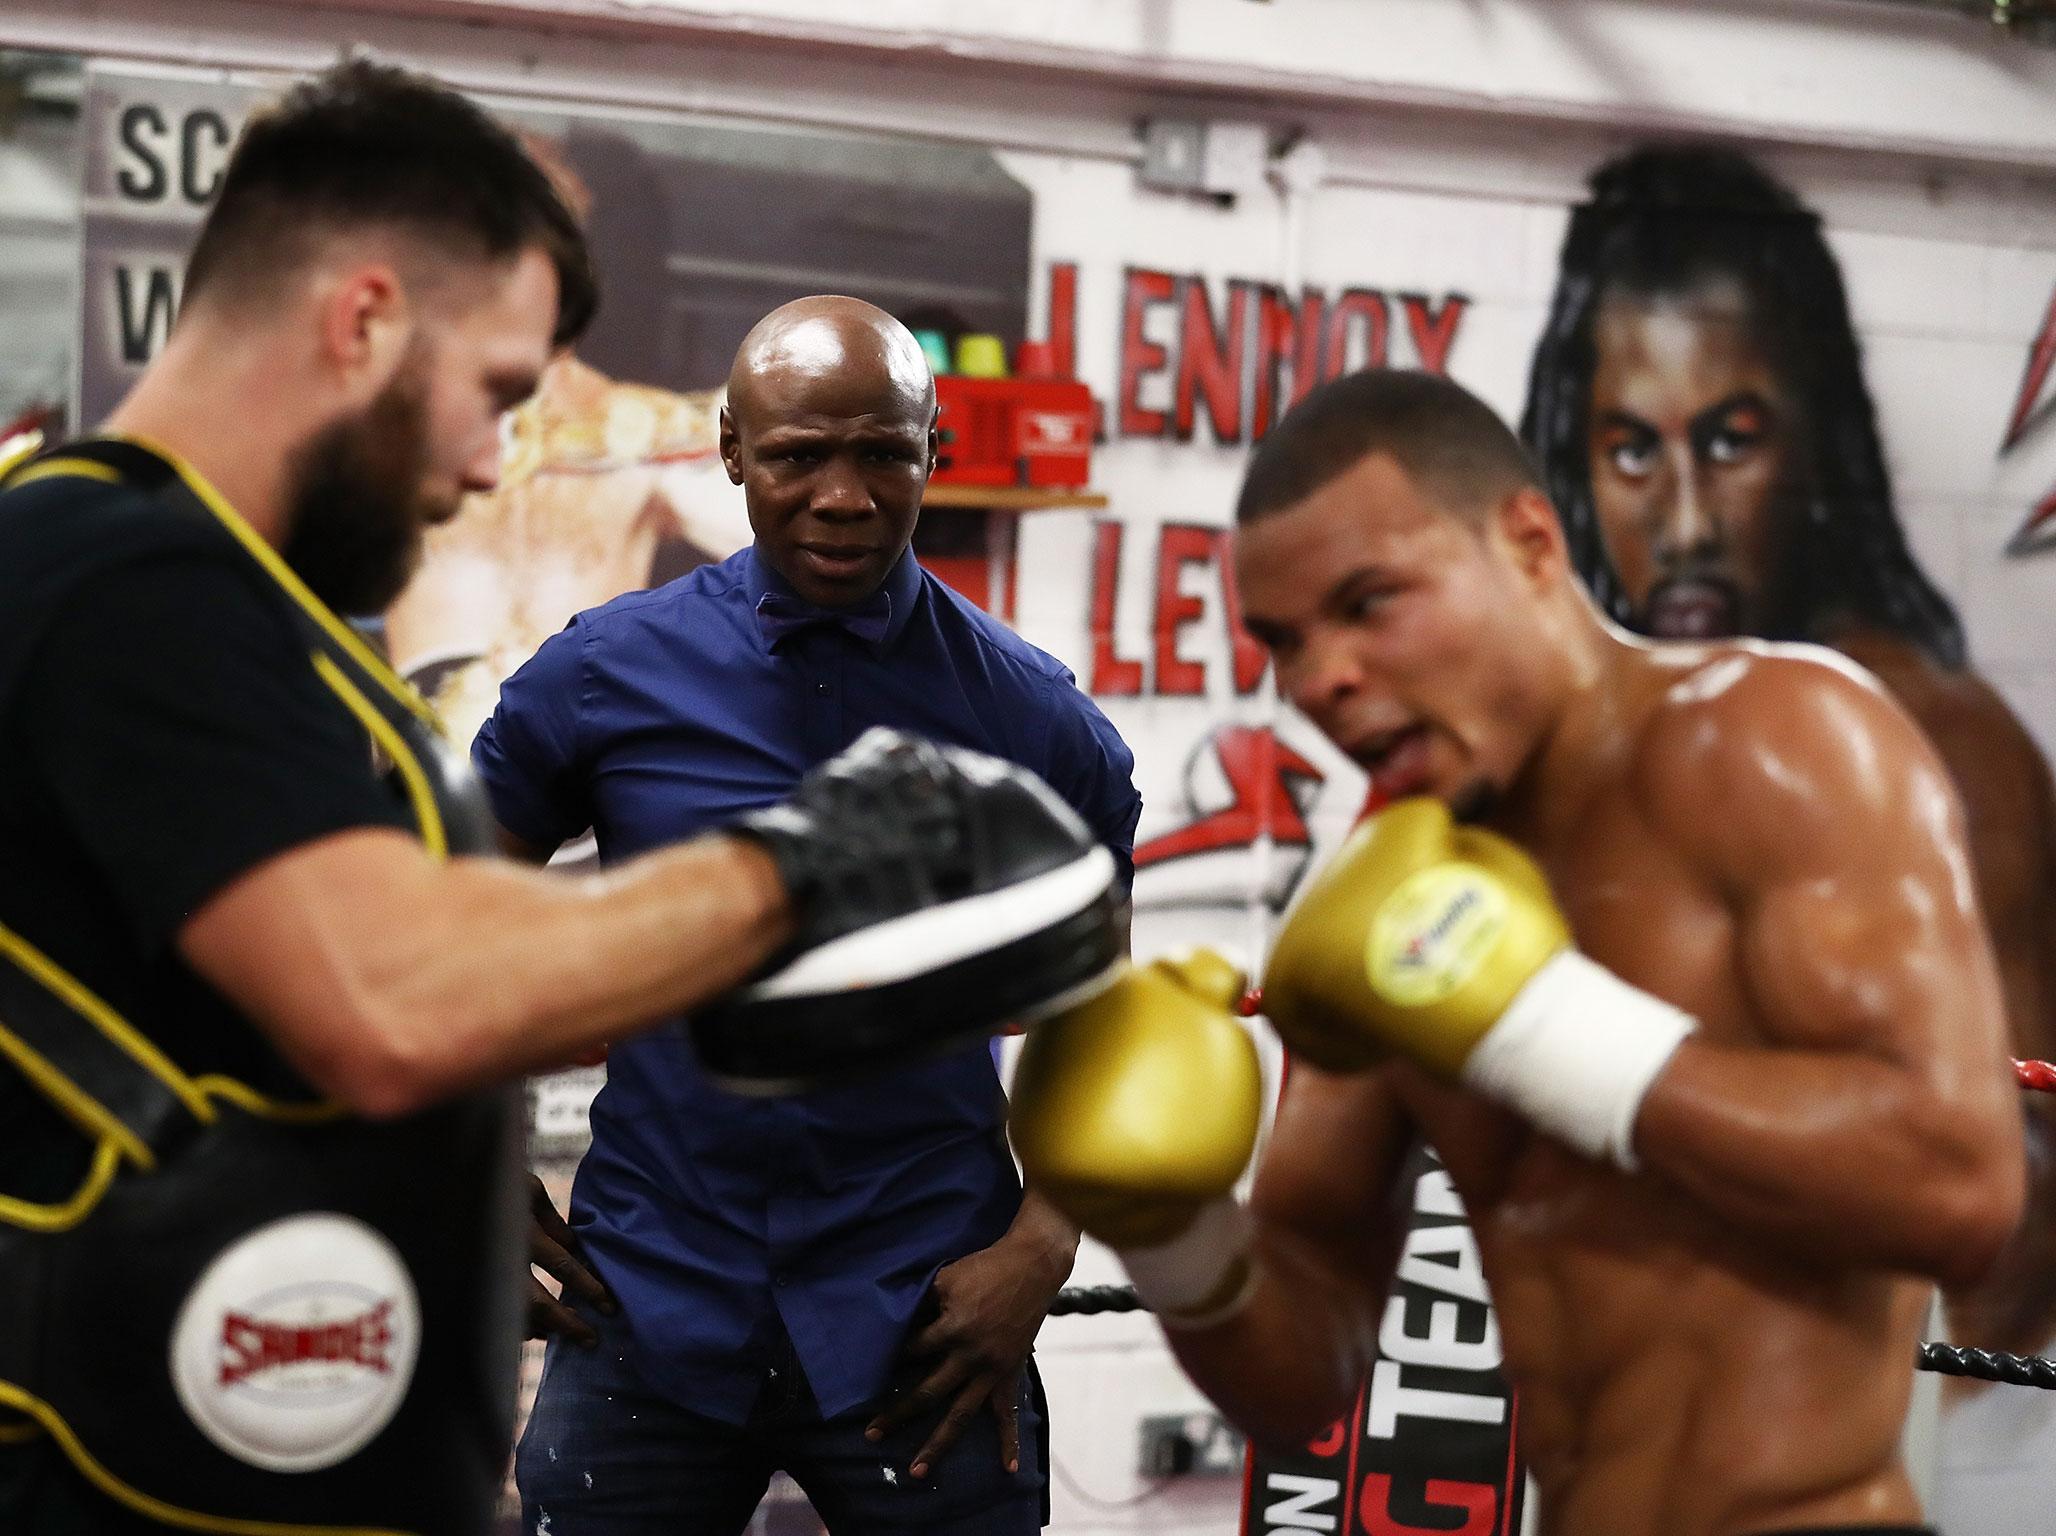 Chris Eubank Jnr has the chance to follow in his father's footsteps this weekend